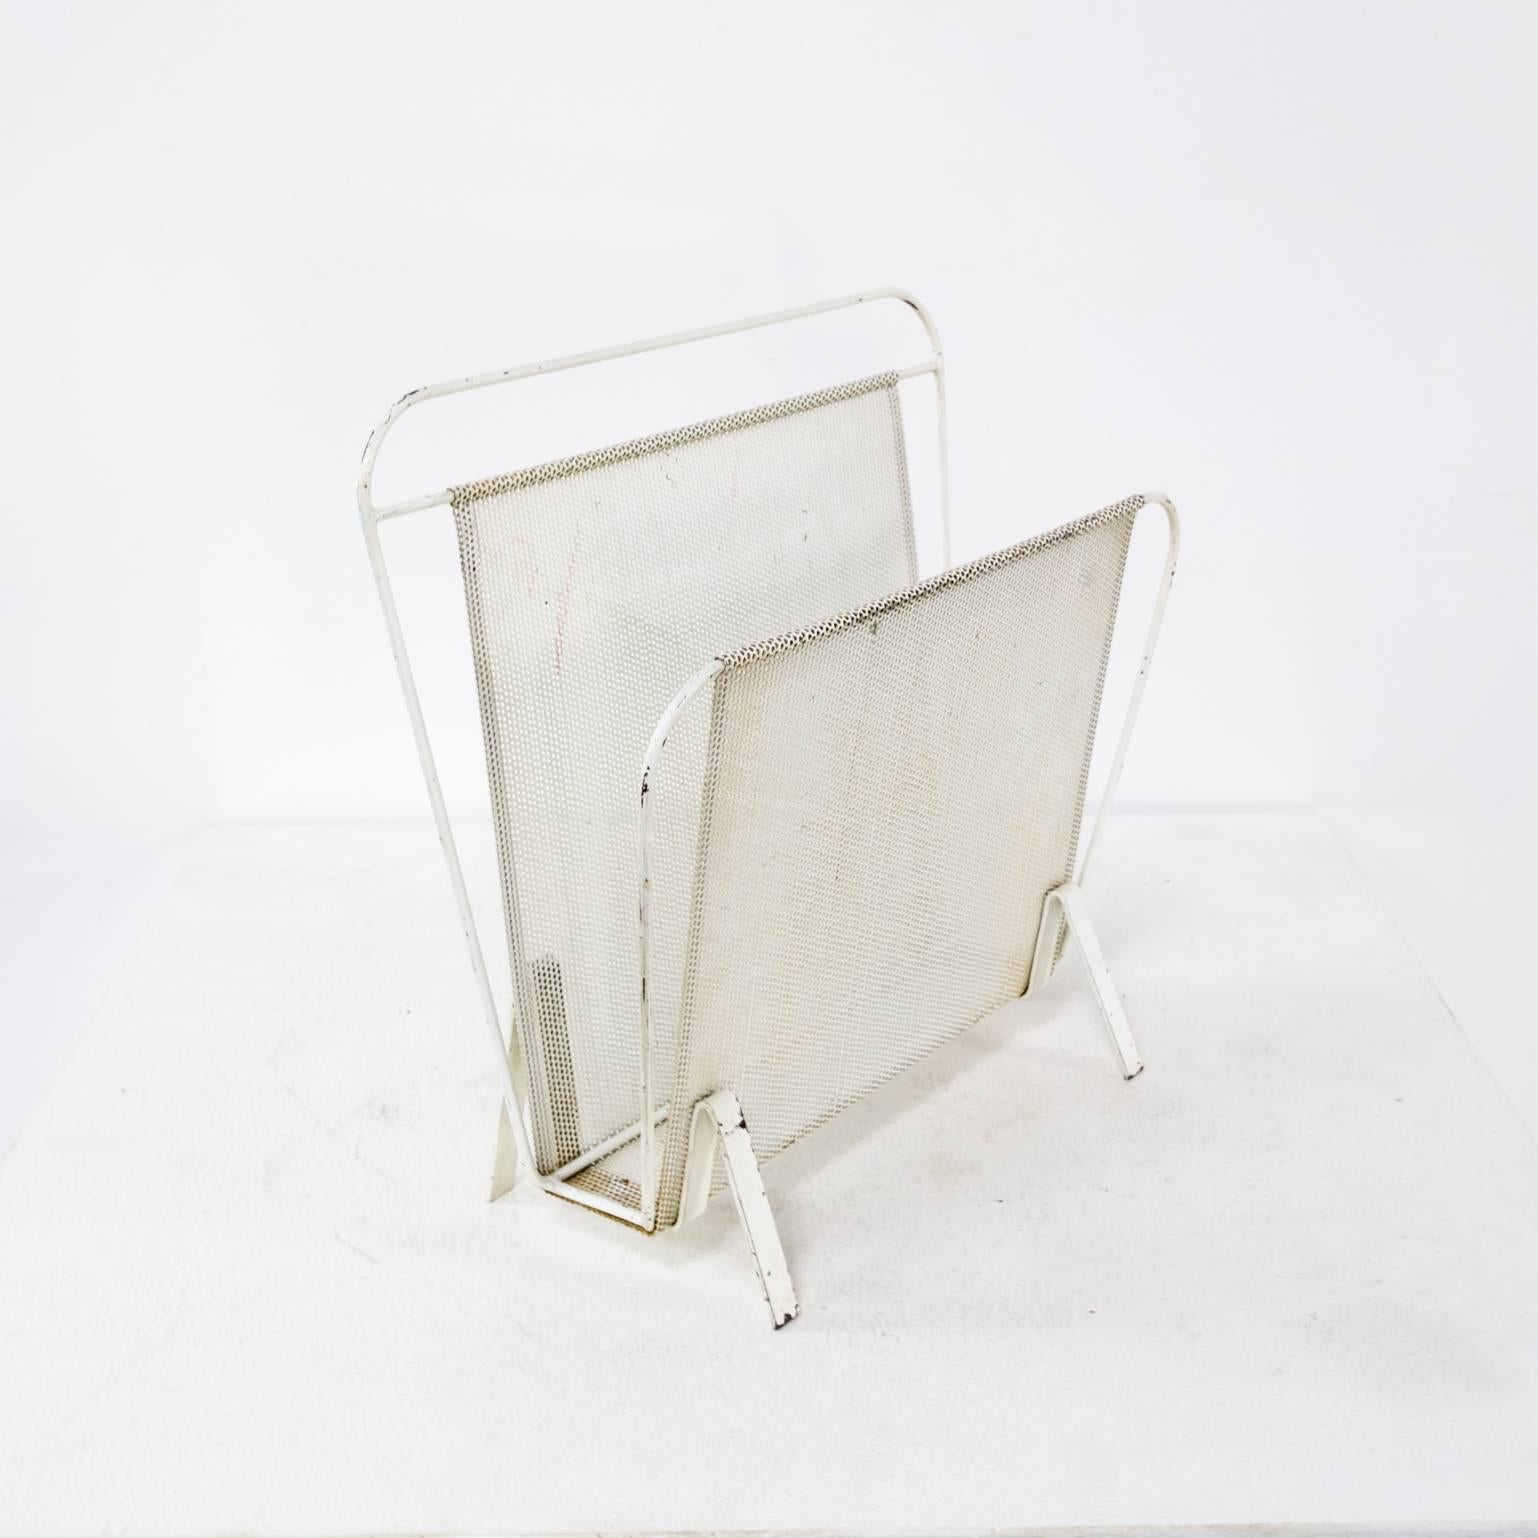 1950s Mathieu Matégot magazine holder for Artimeta. Good condition, wear consistent with age and use.